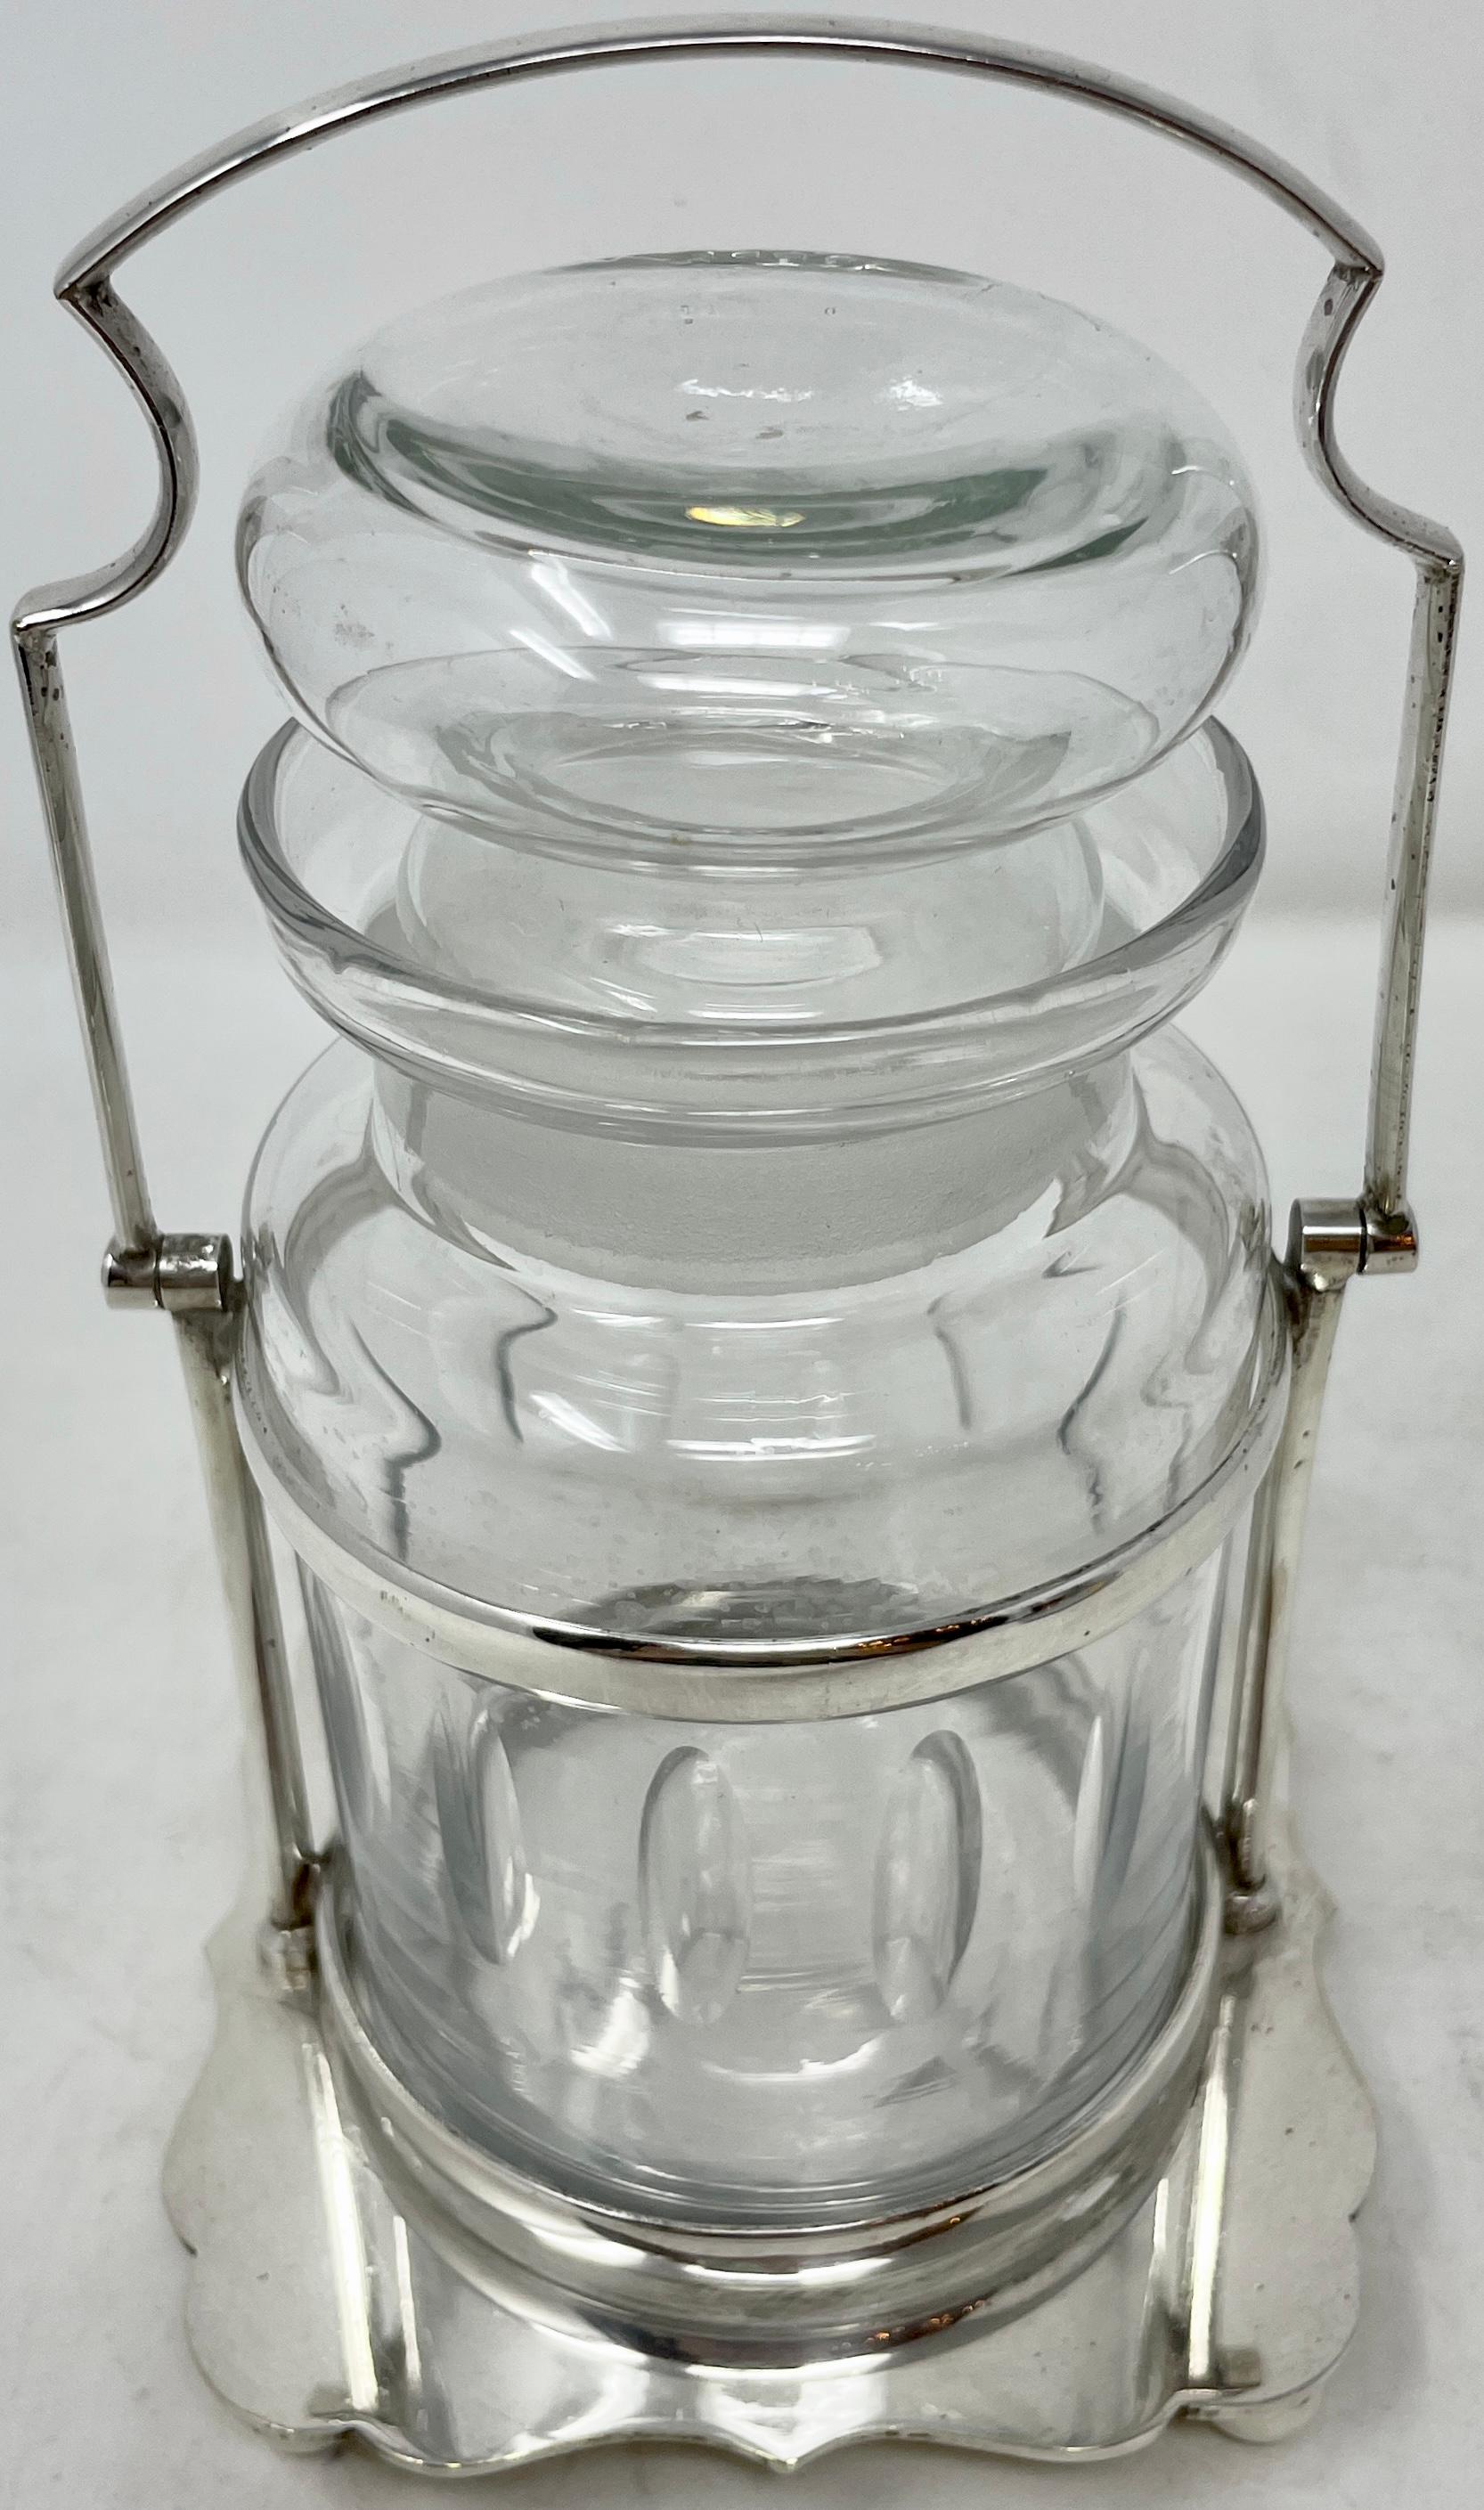 Antique English Crystal and silver plate Pickle Castor (Jar and Stand), Circa 1900-1910.